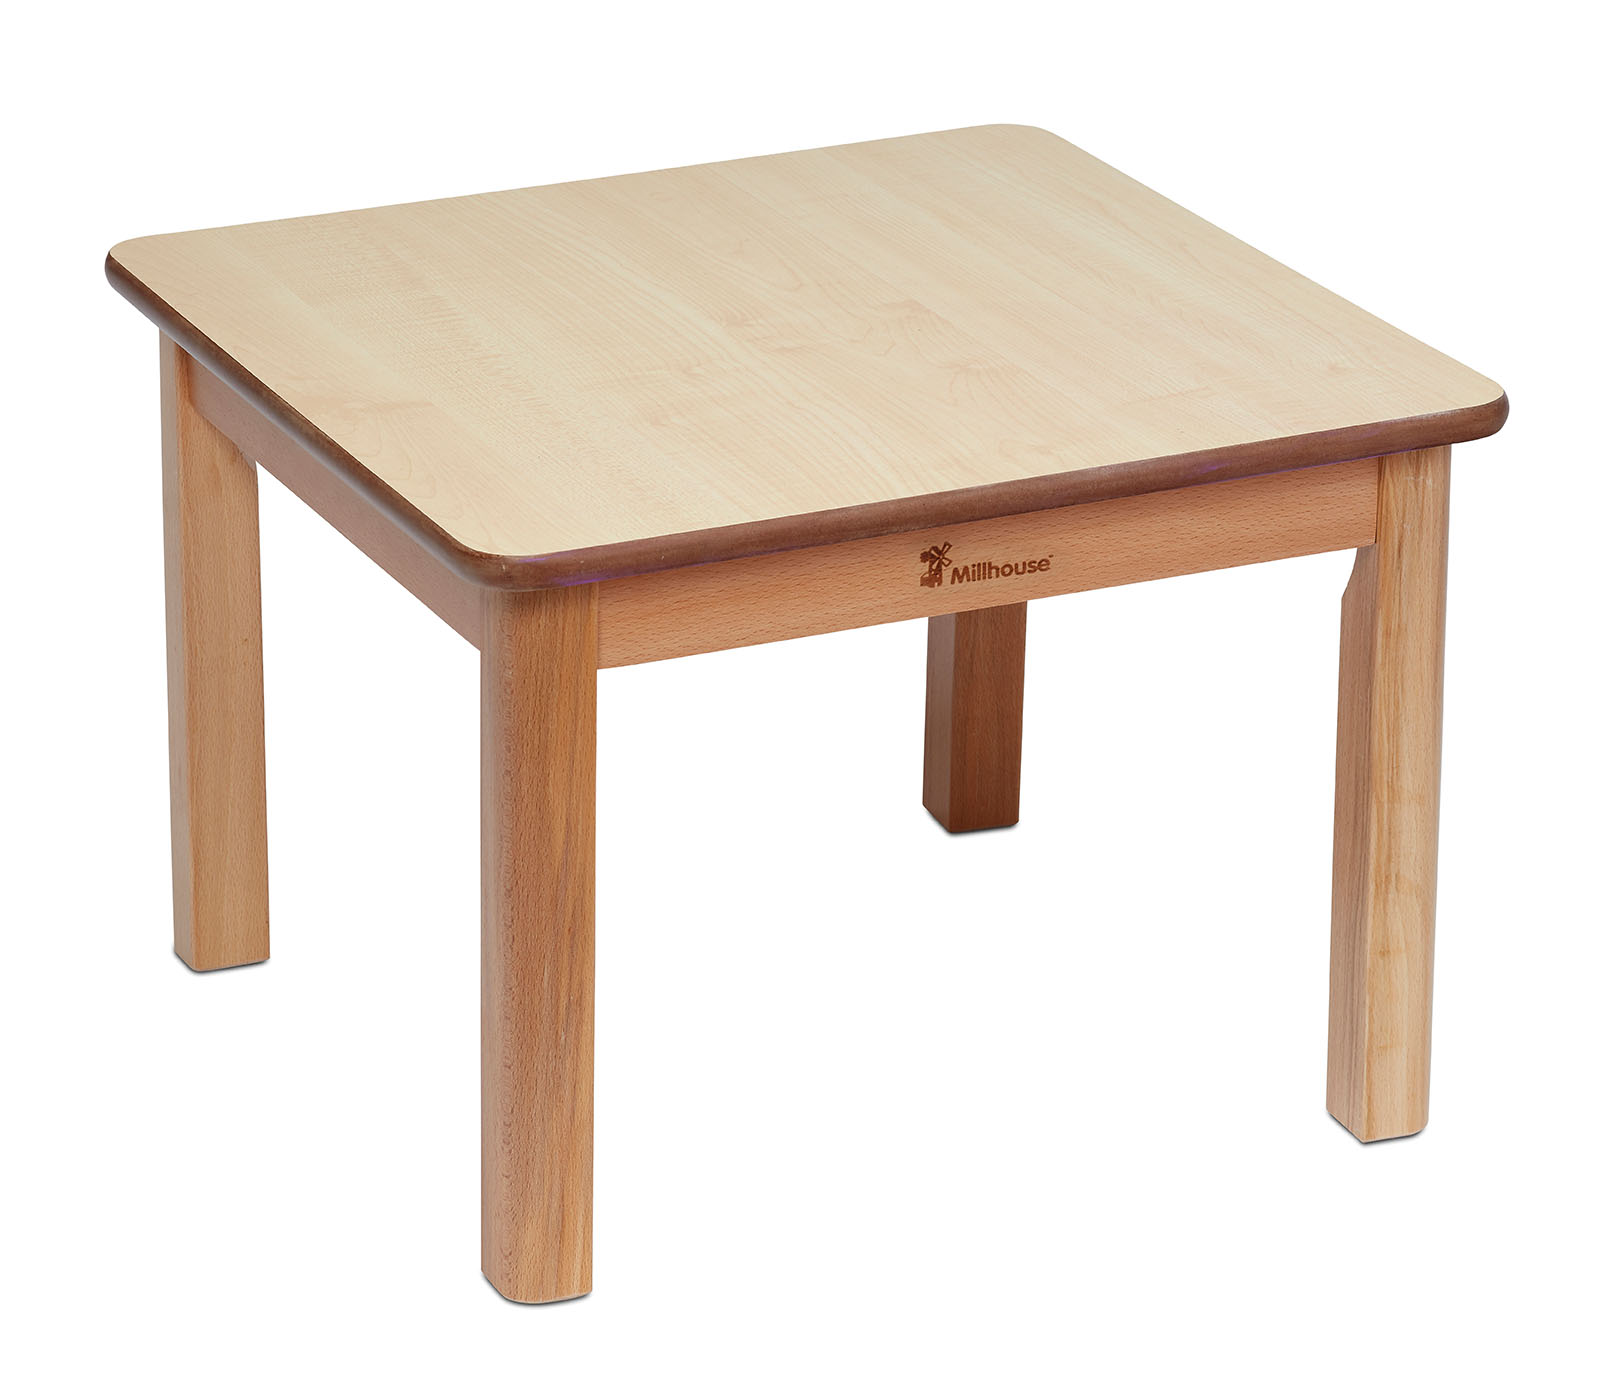 PT137-PT141-Millhouse-Early-Years-Furniture-Square-Table_Main_RGB.jpg